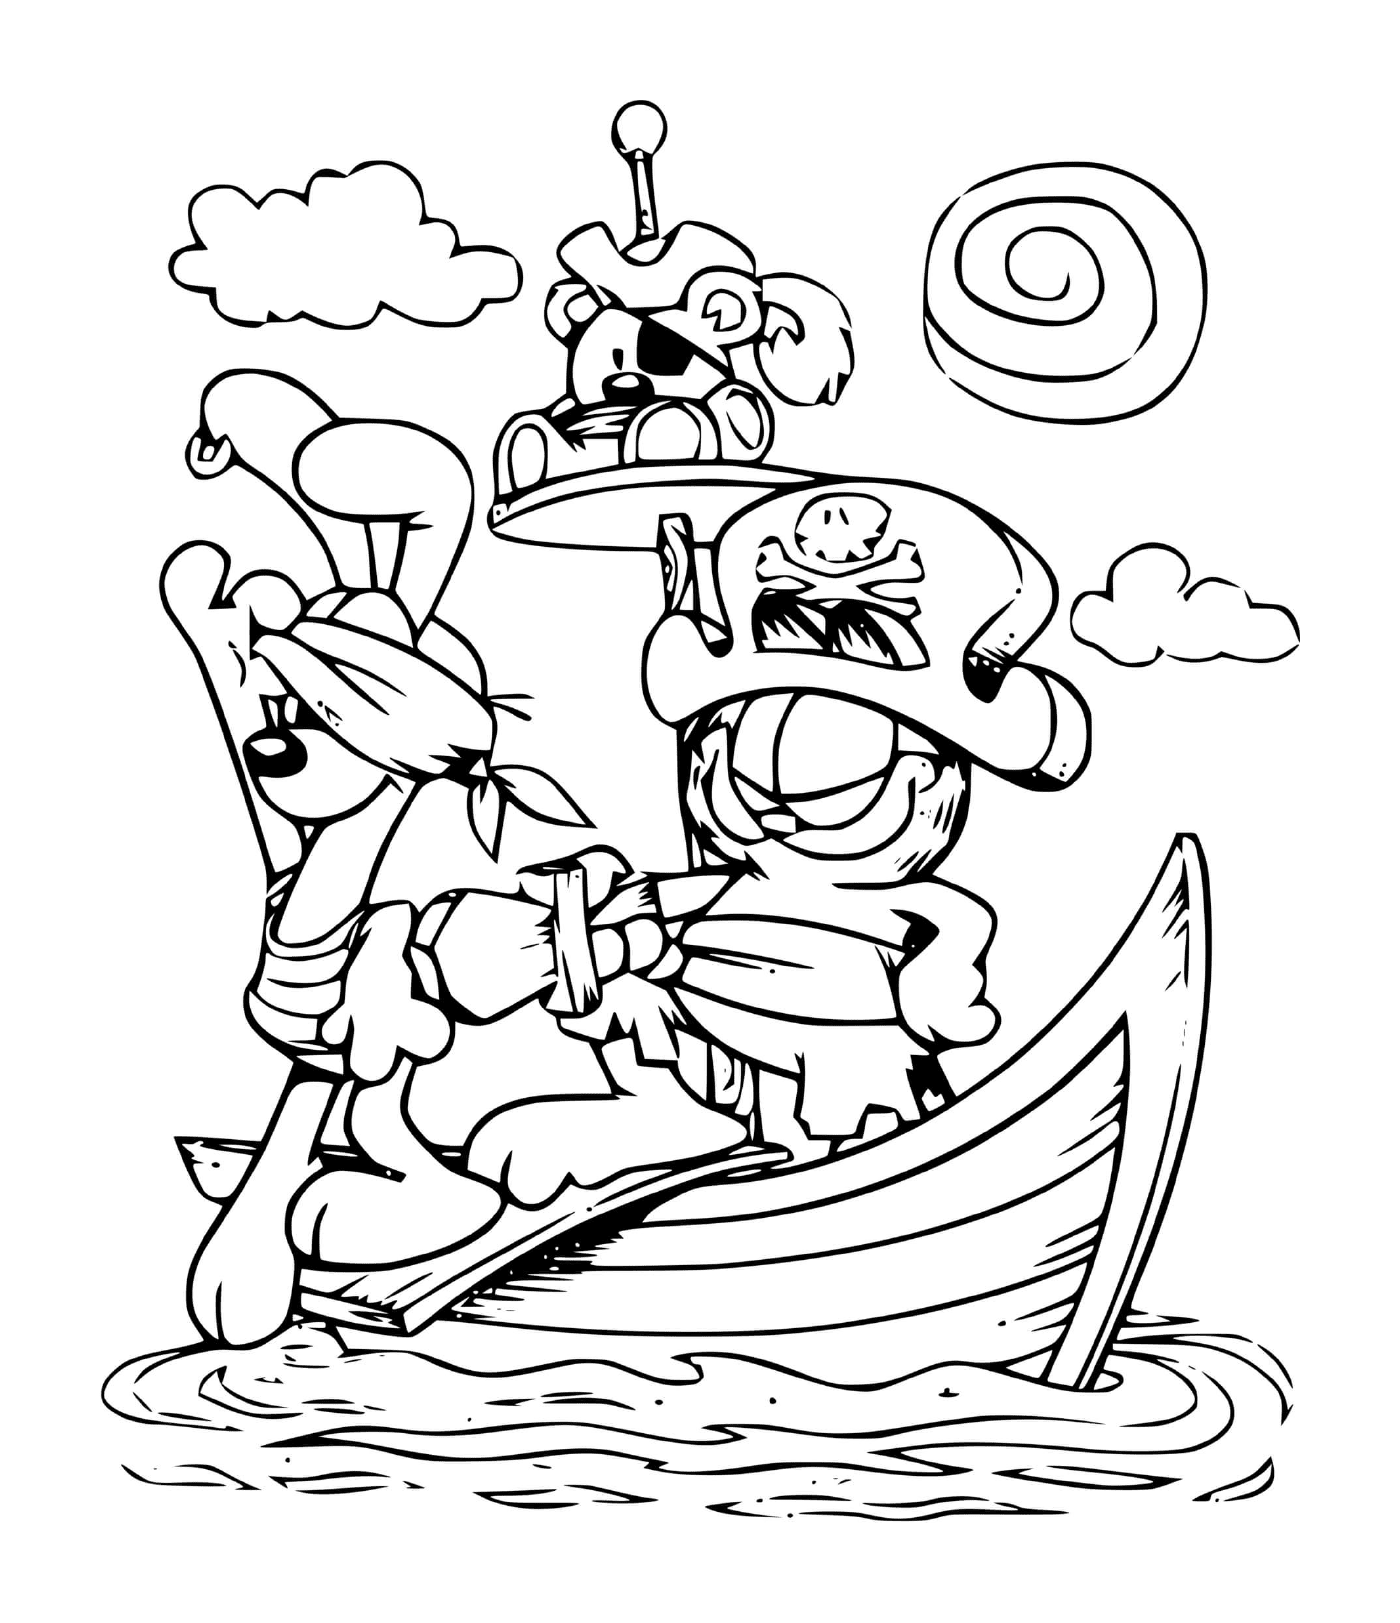  Garfield the pirate on a boat at sea 